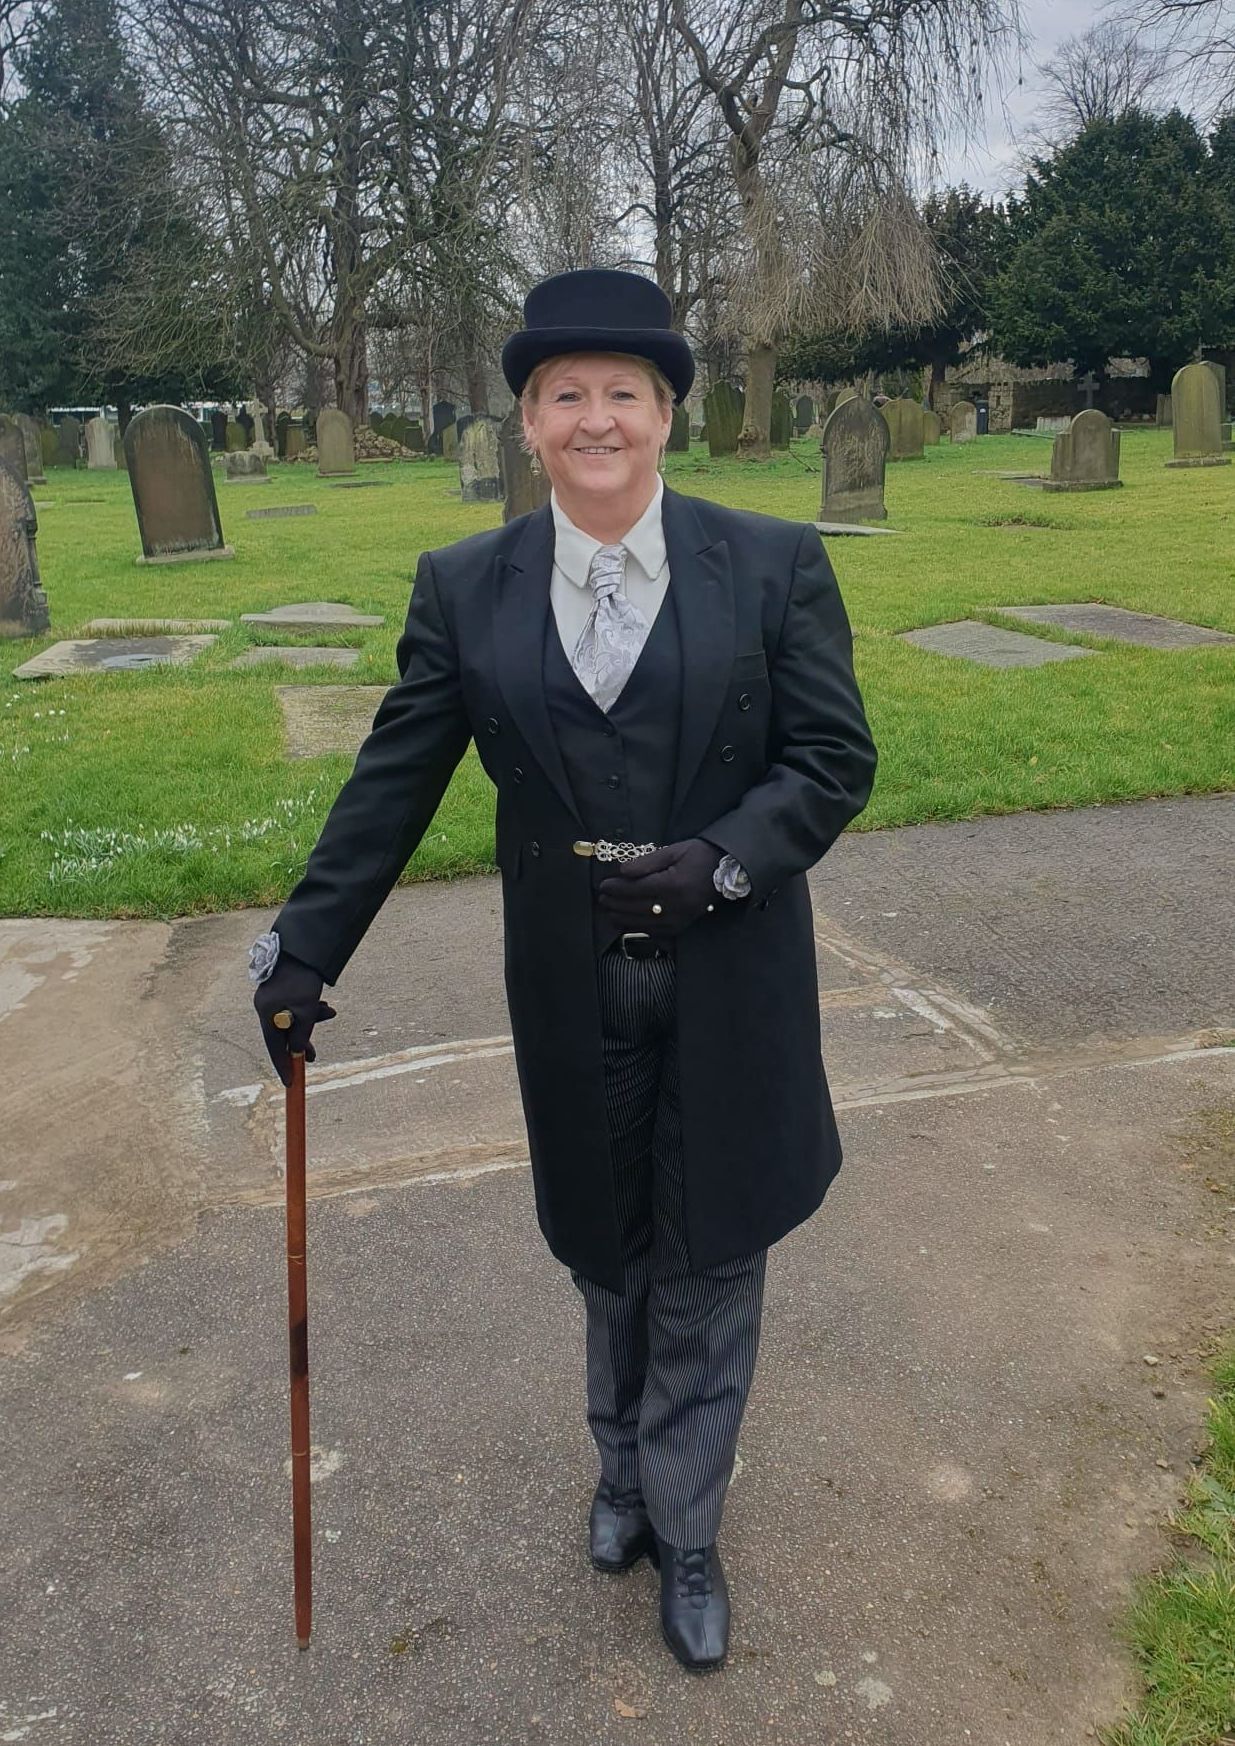 A man in a suit and top hat is holding a cane in a cemetery.